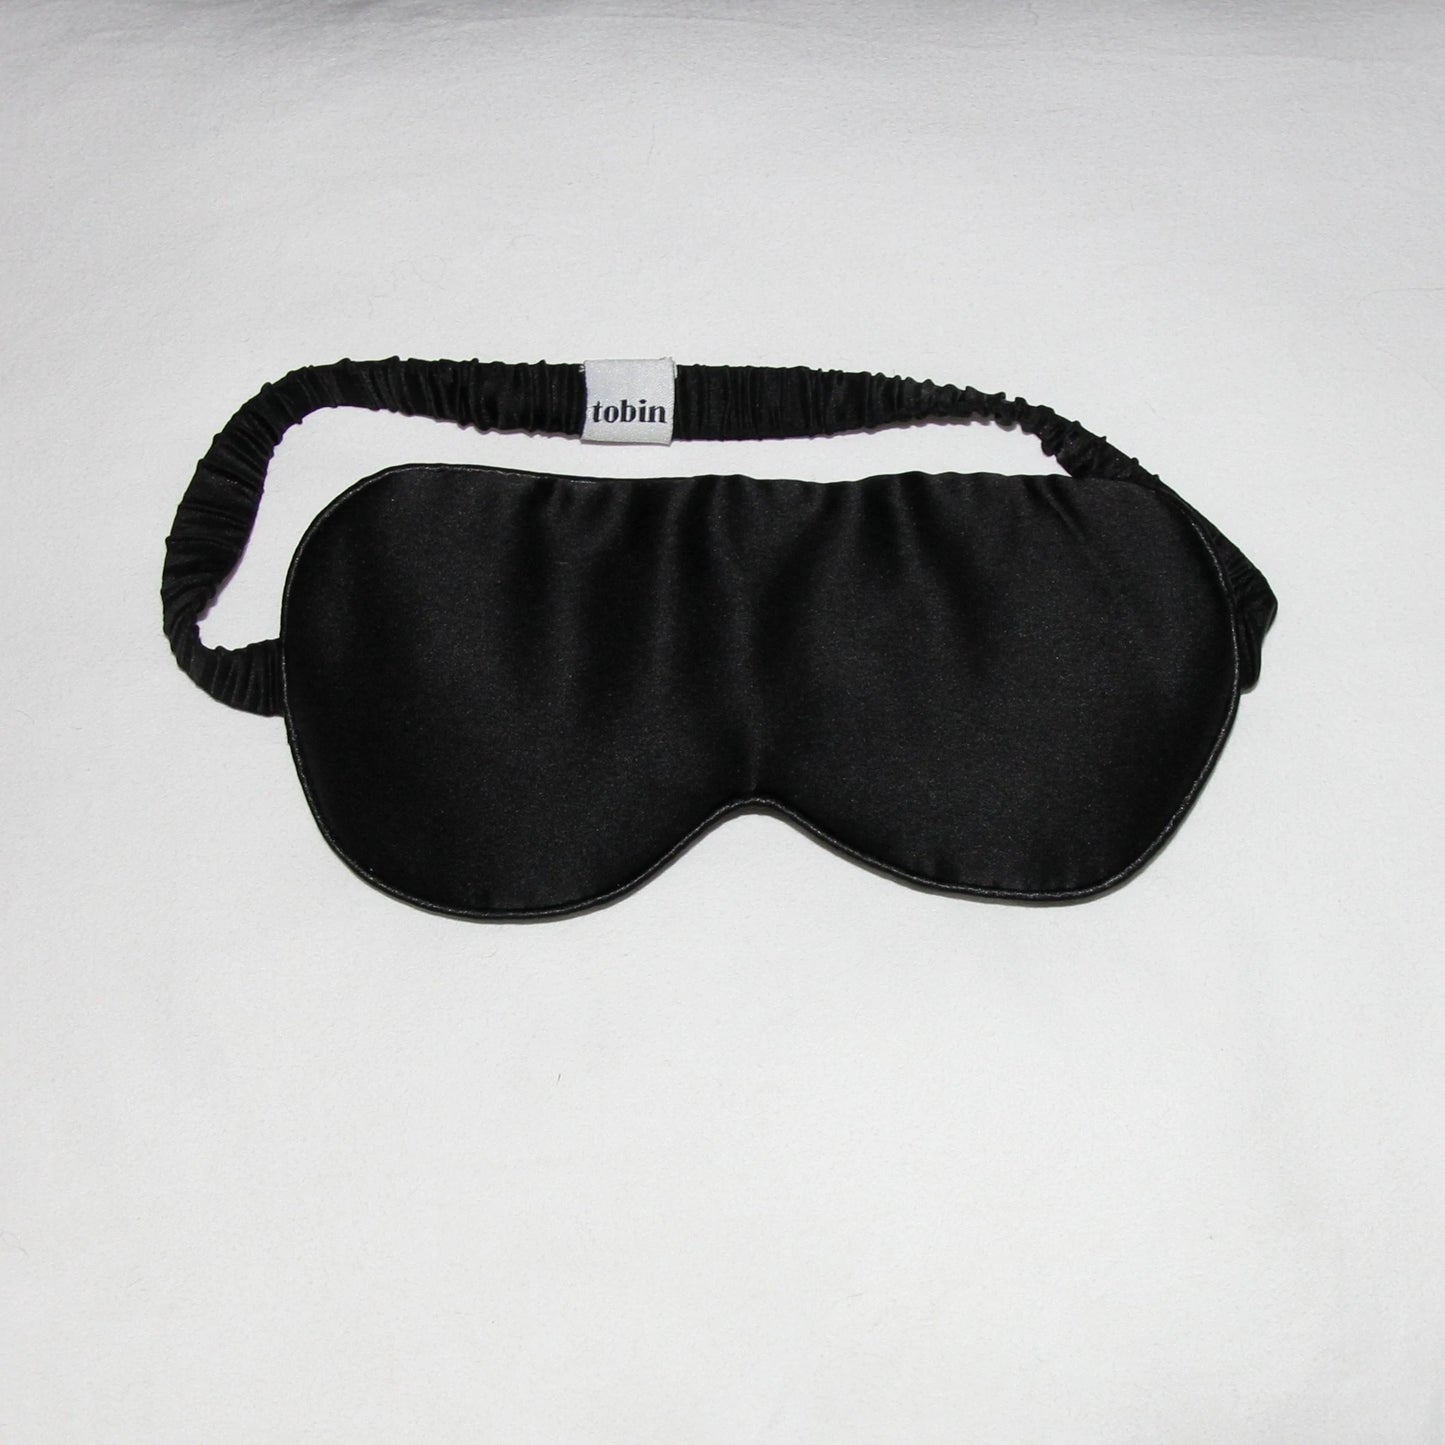 The Weighted Eye Mask